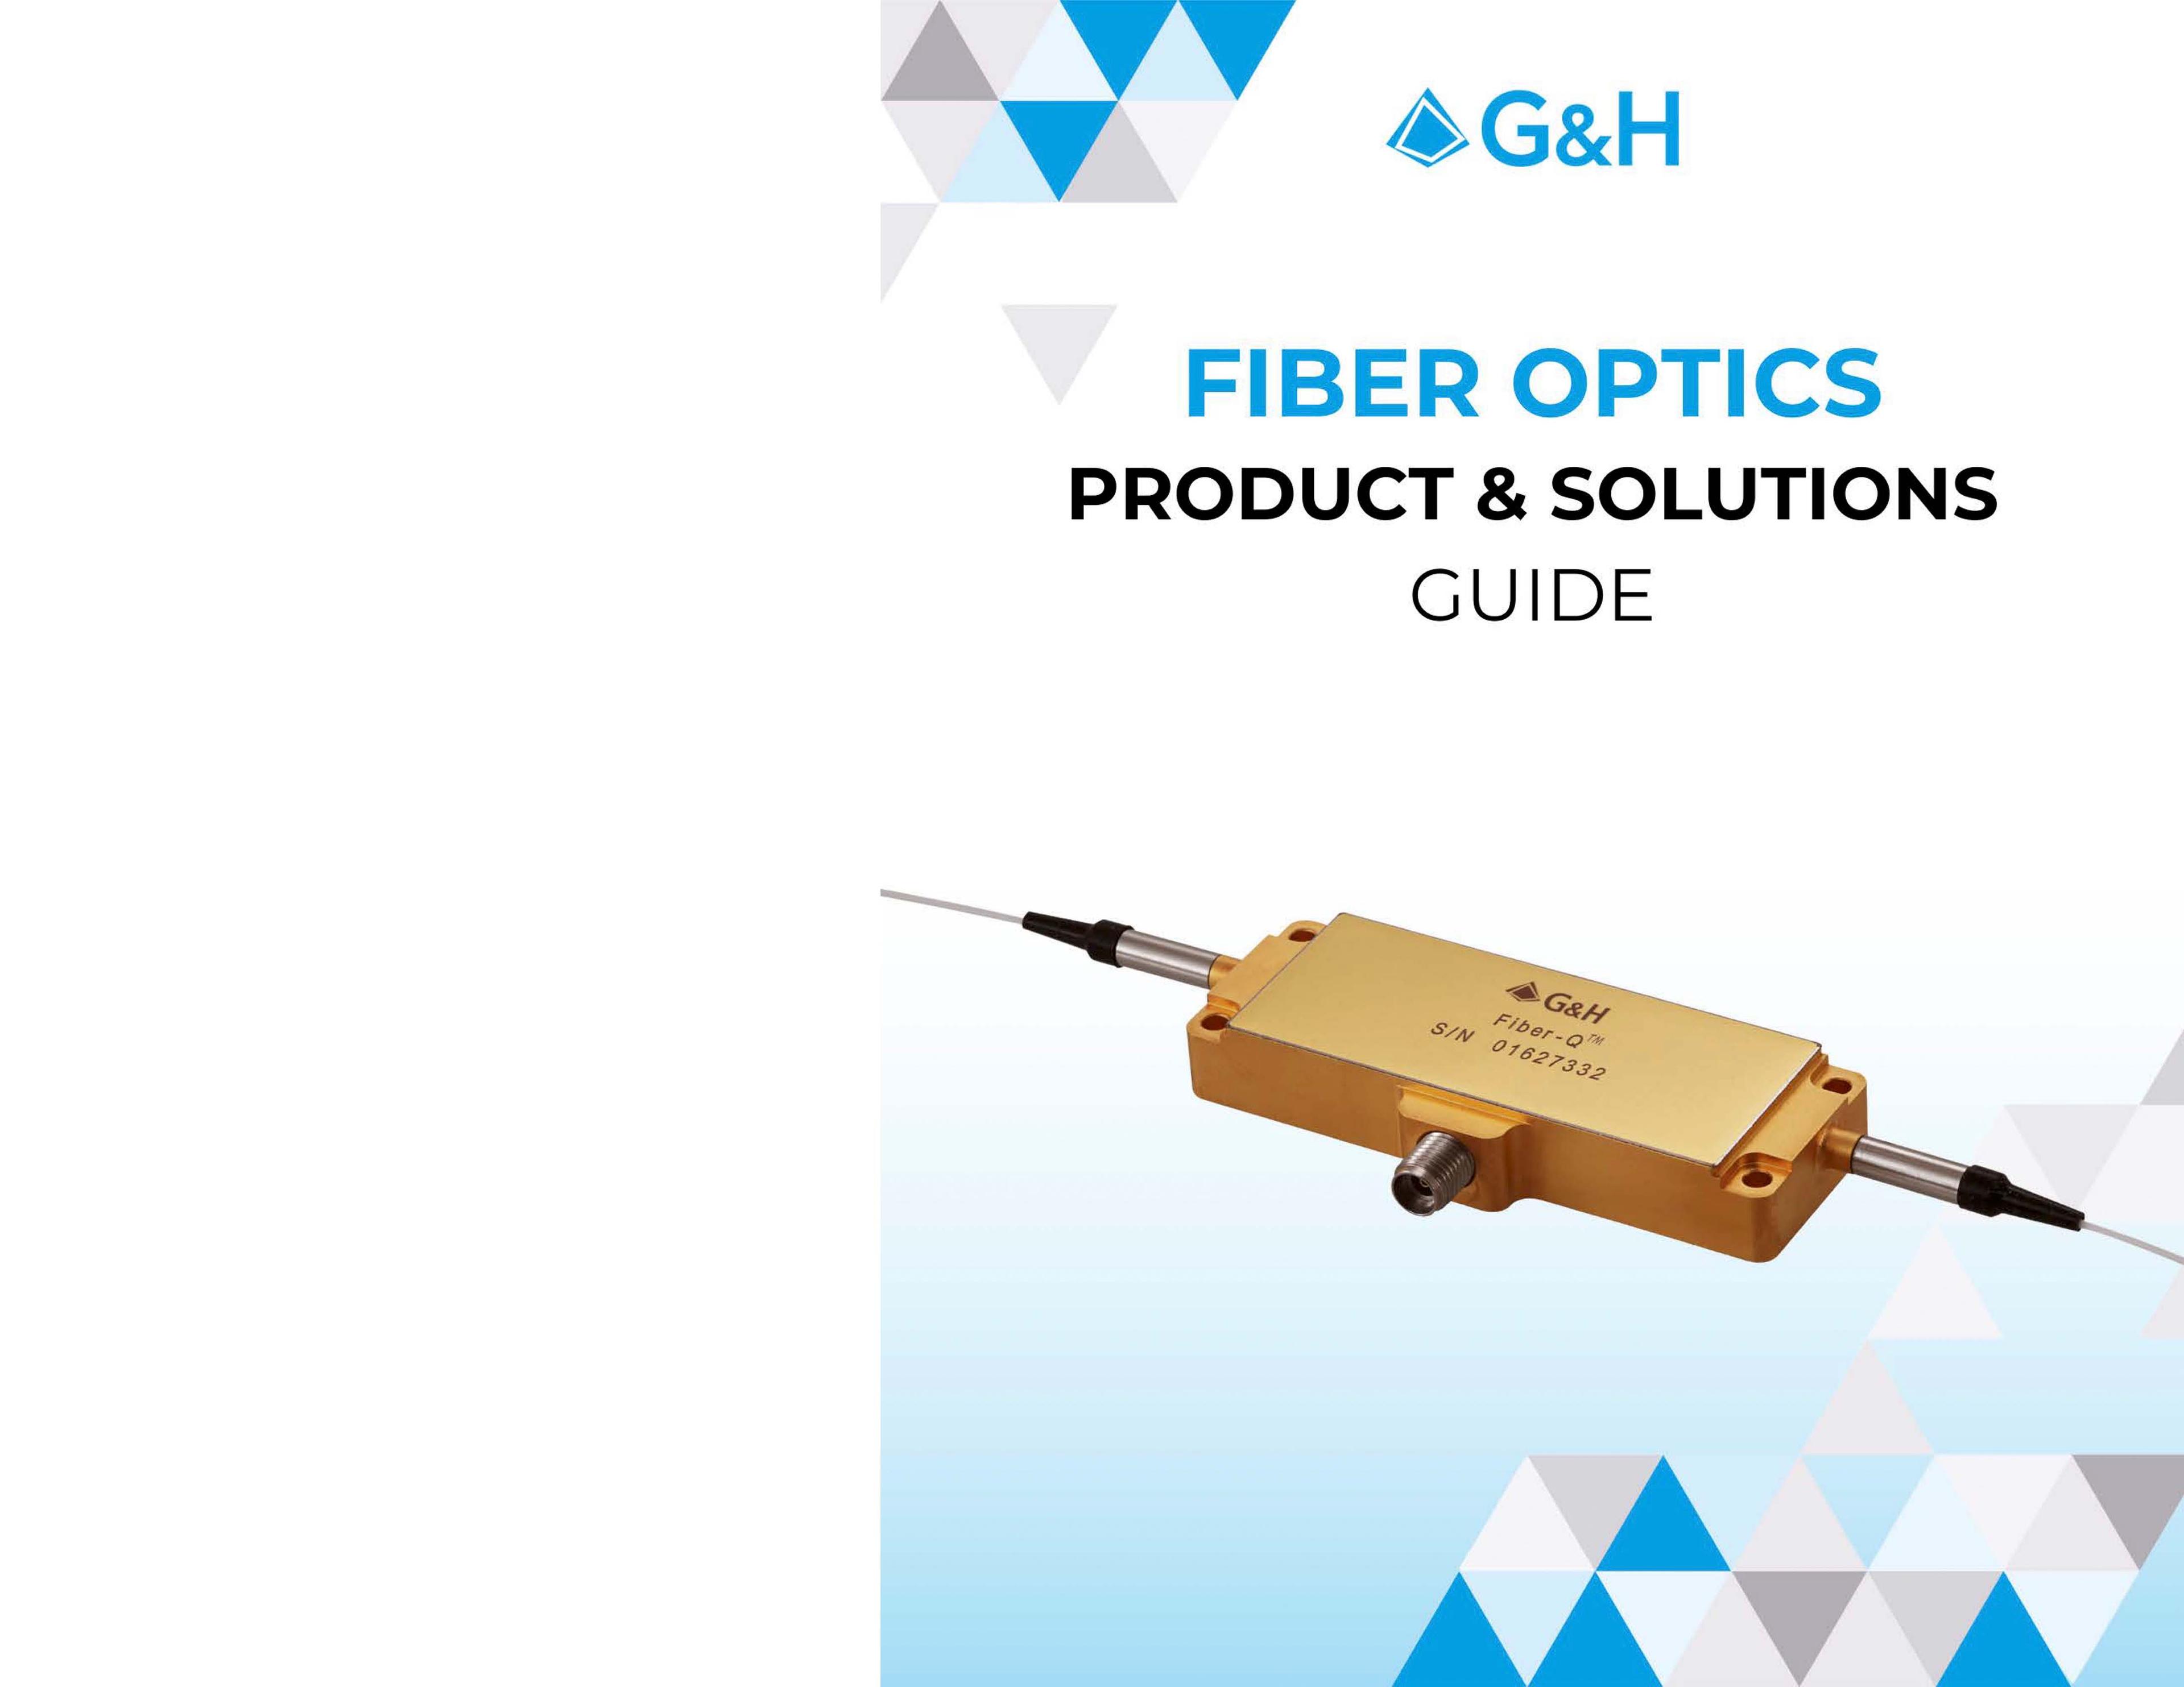 G&H Product & Solutions Guide - Fiber Optics Page 01